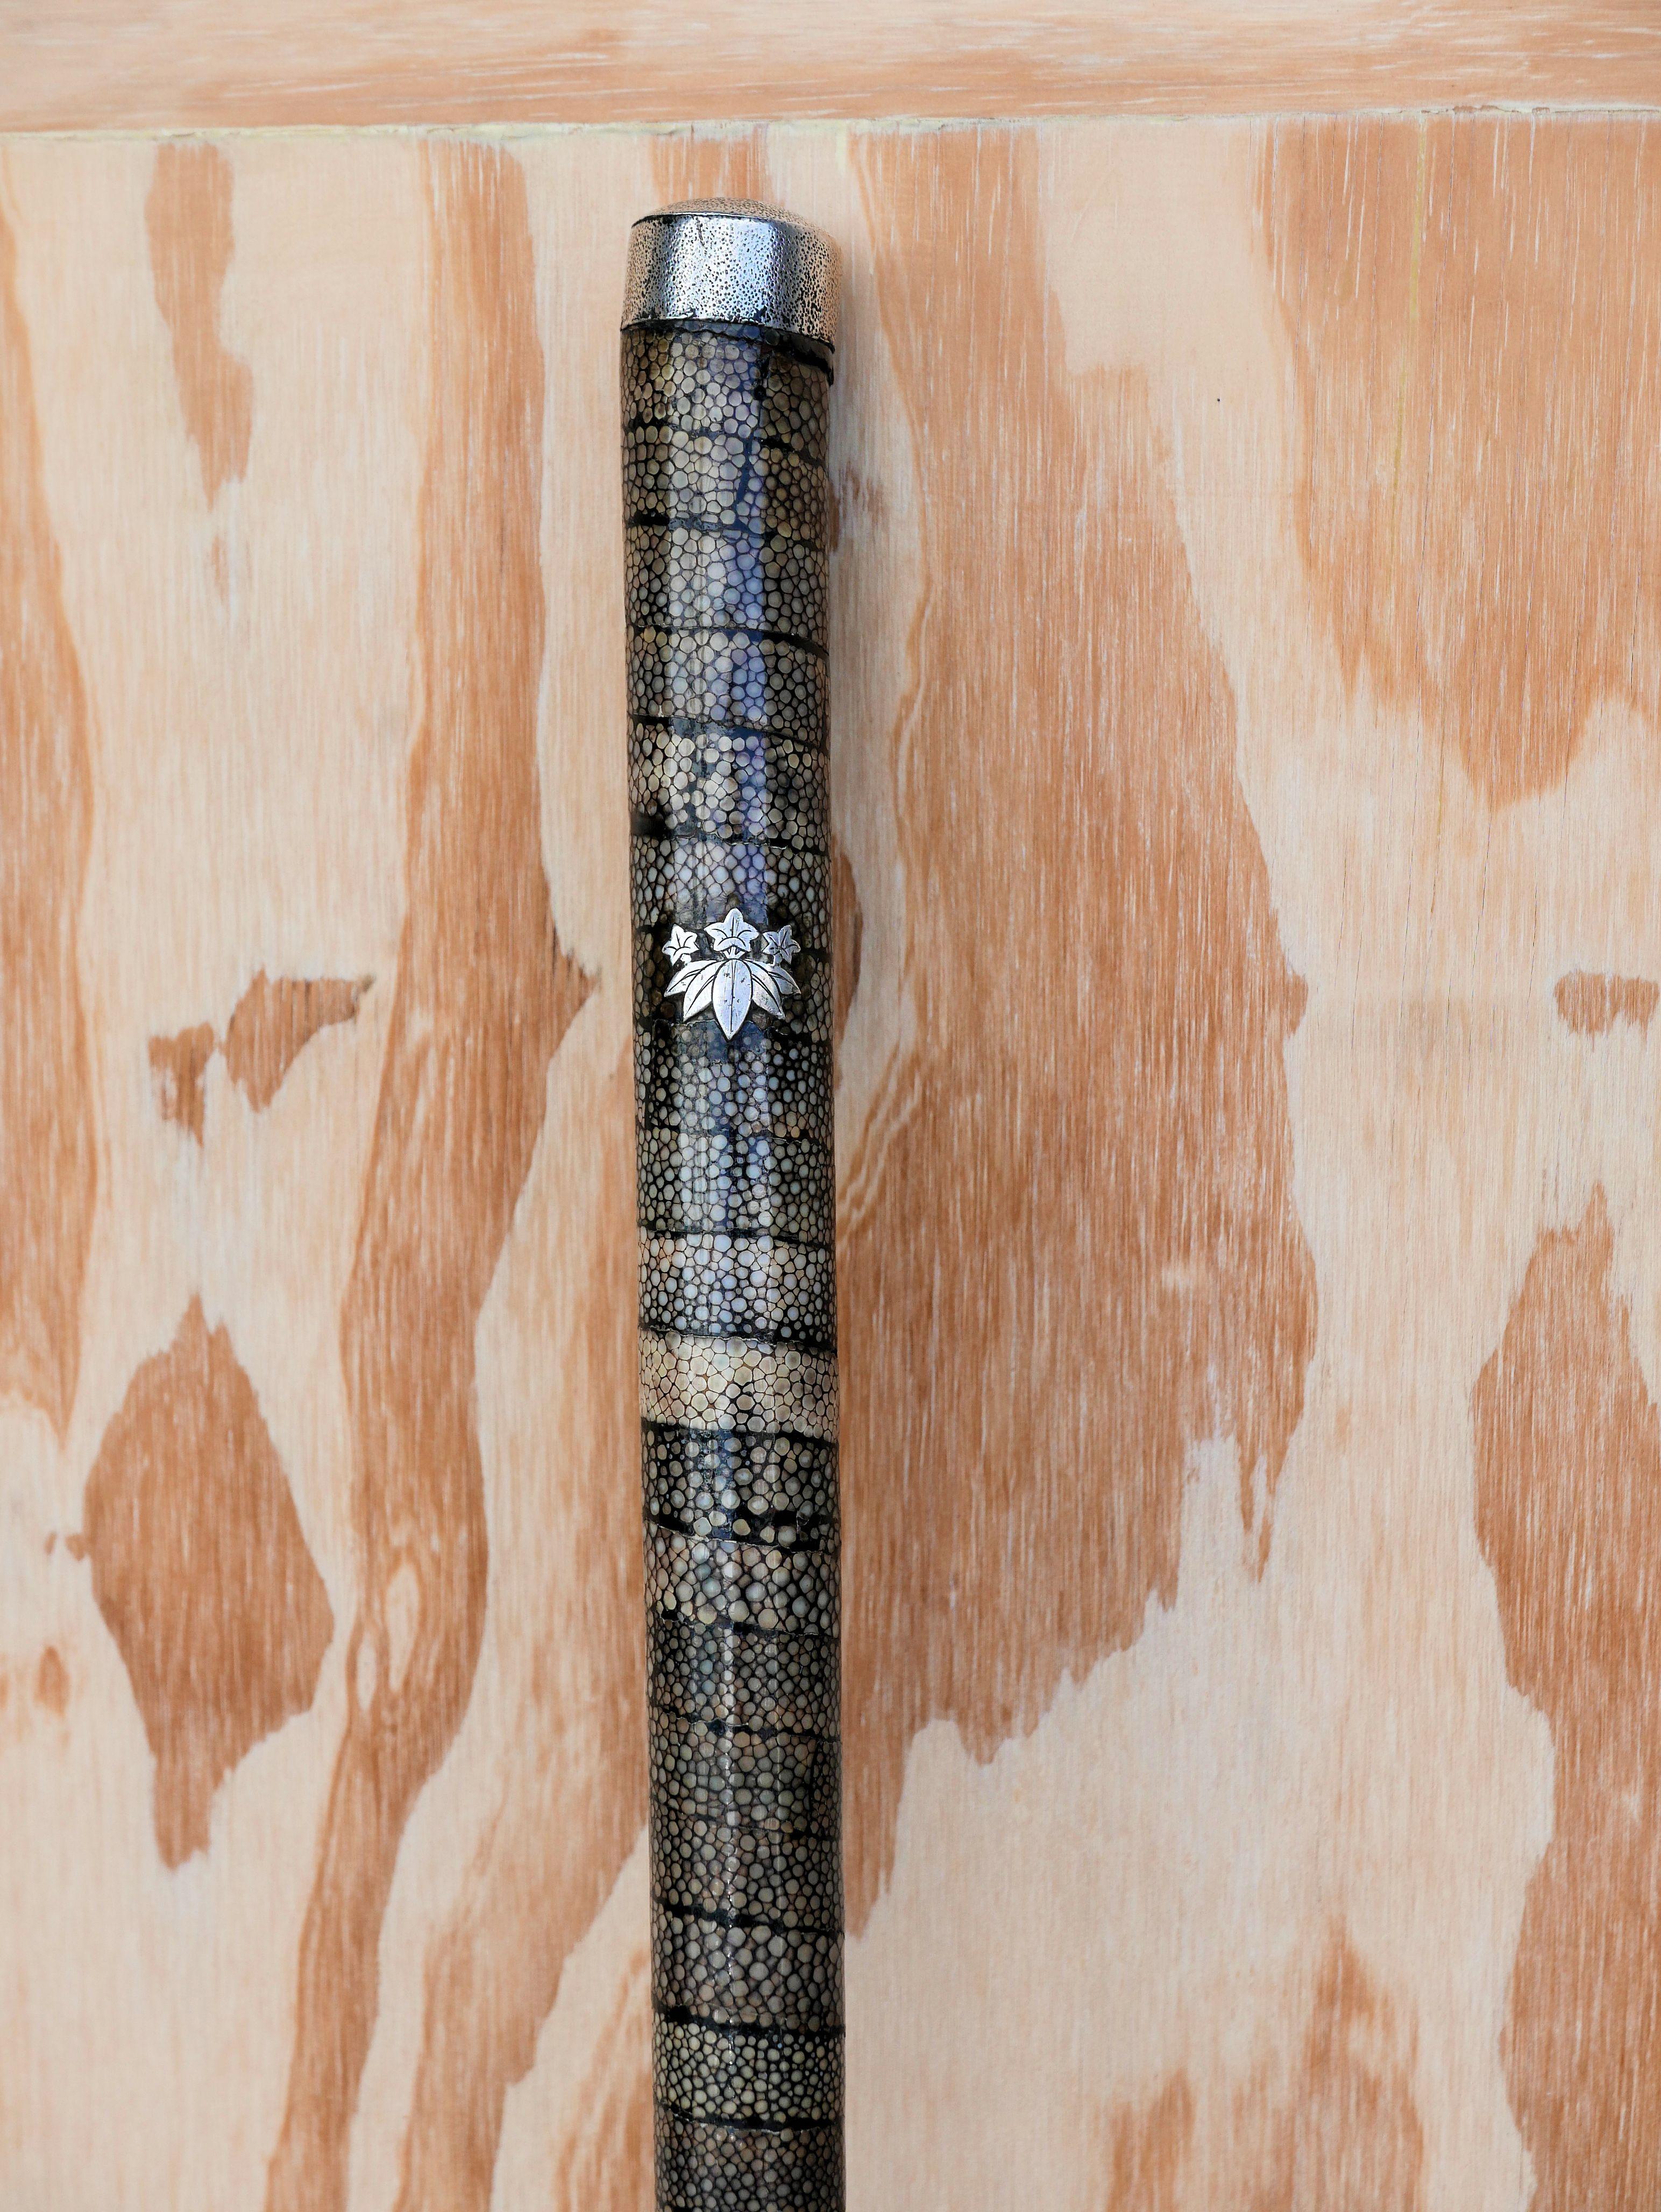 Rare late 19th century Meiji period cane clad in spiraled shagreen with the Minamoto Clan Crest in sterling, which at one point was the imperial family and a shogun of Japan. Cap is sterling and the bottom foot is hand forged. The Minamoto Clan